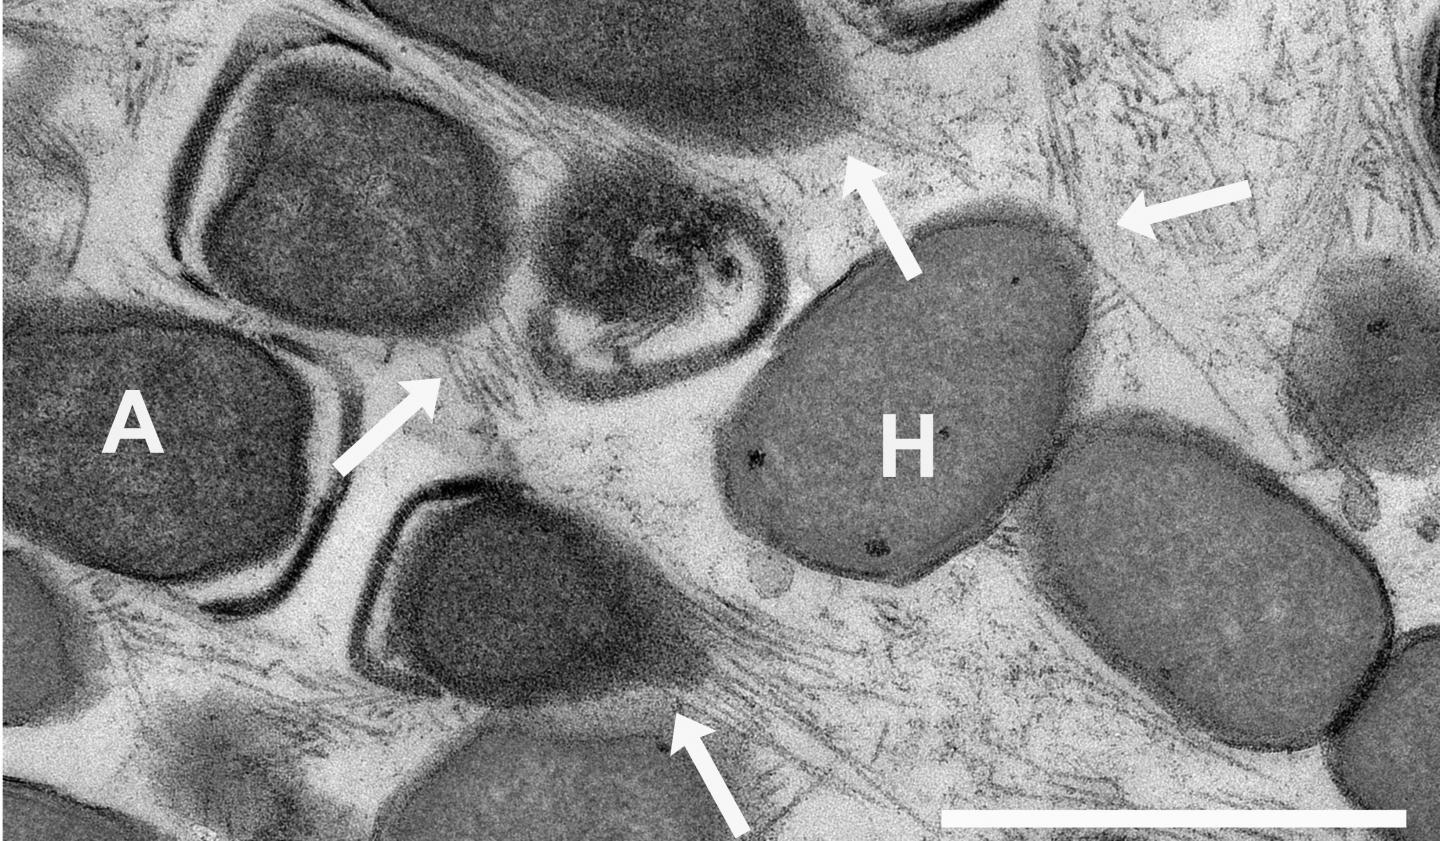 Caption: Electron micrograph of the nanowires shows connecting archaea and sulphate reducing bacteria. The wires stretch out for several micrometres, longer than a single cell. The white bar represents the length of one micrometre. The arrows indicate the nanowires (A=ANME-Archaeen, H=HotSeep-1 partner bacteria). Credit: MPI f. Biophysical Chemistry